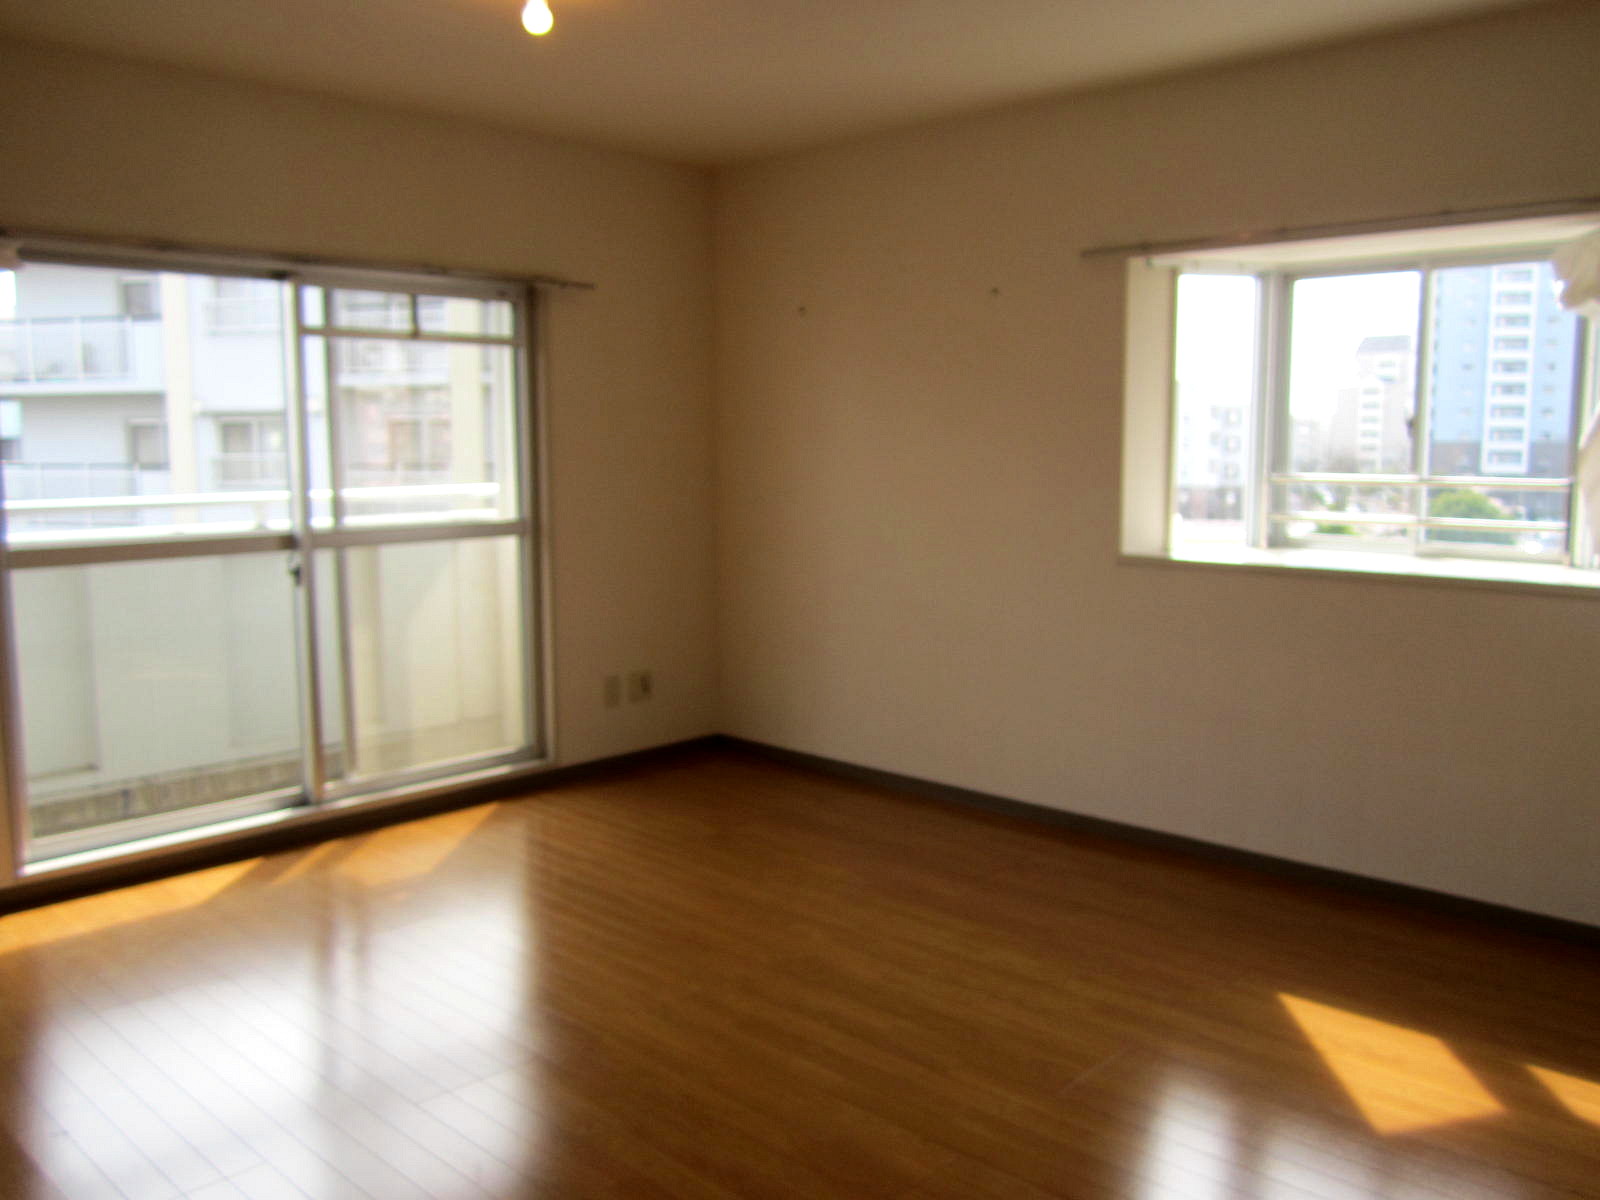 Living and room. A bay window 10.4 tatami mats of bright living room